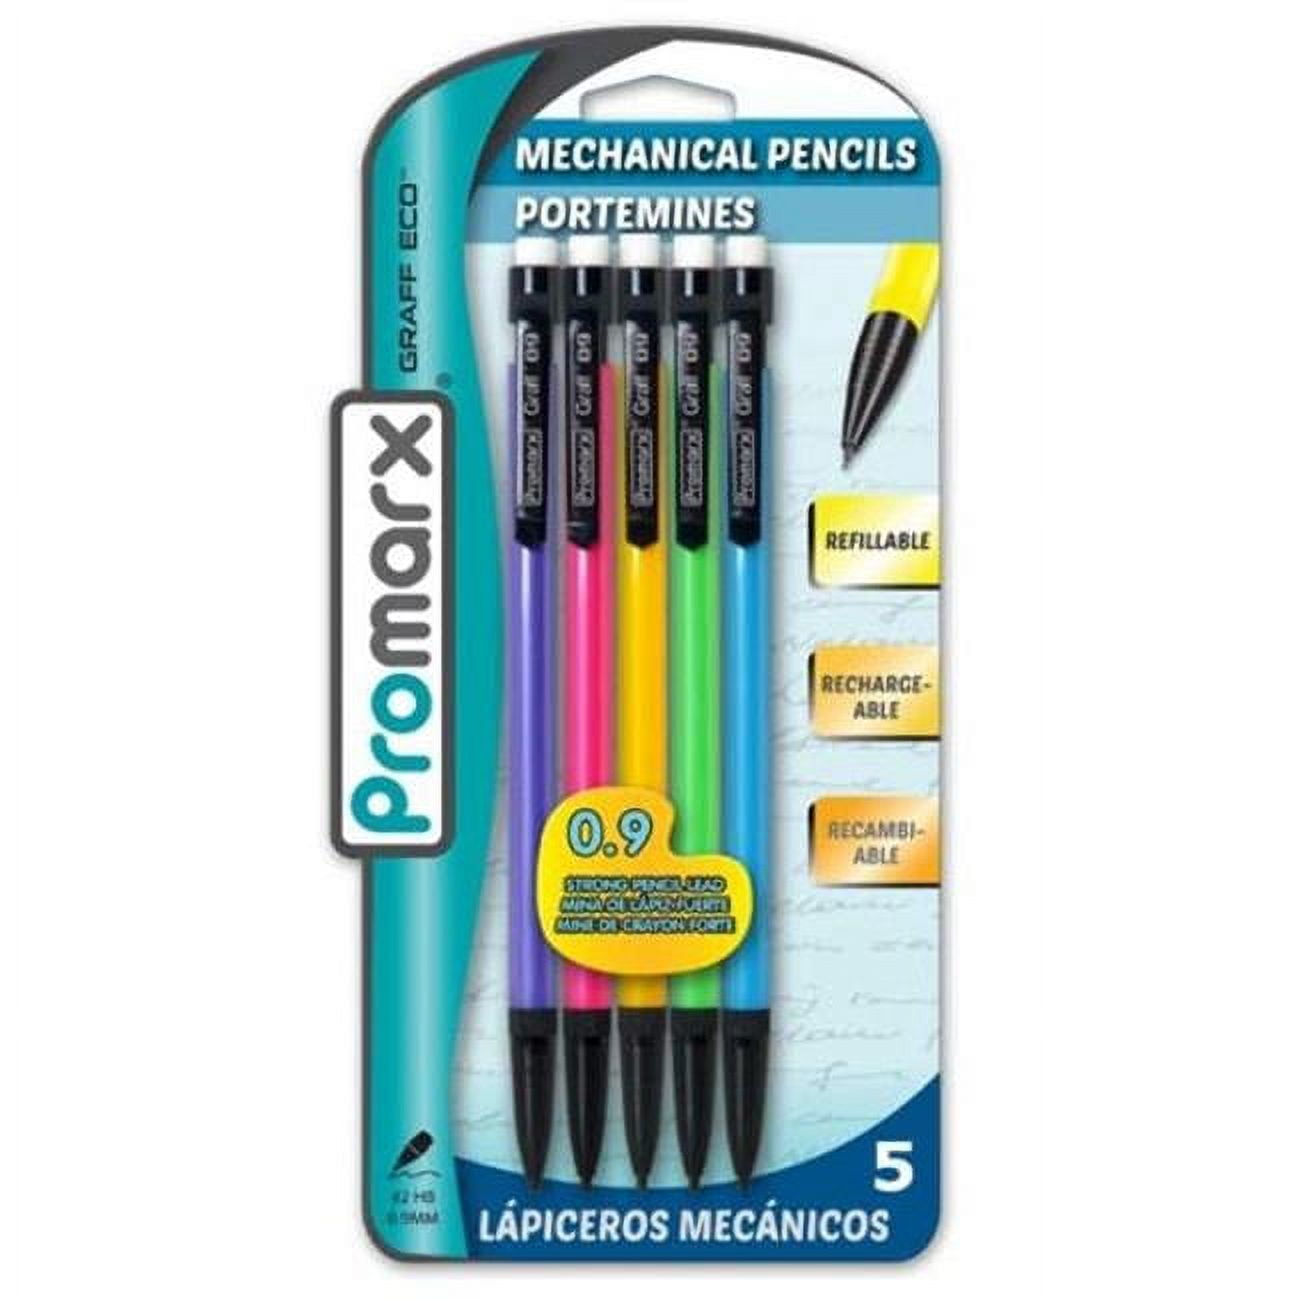 2329855 0.9 Mm Mechanical Pencils - 5 Count - Case Of 48